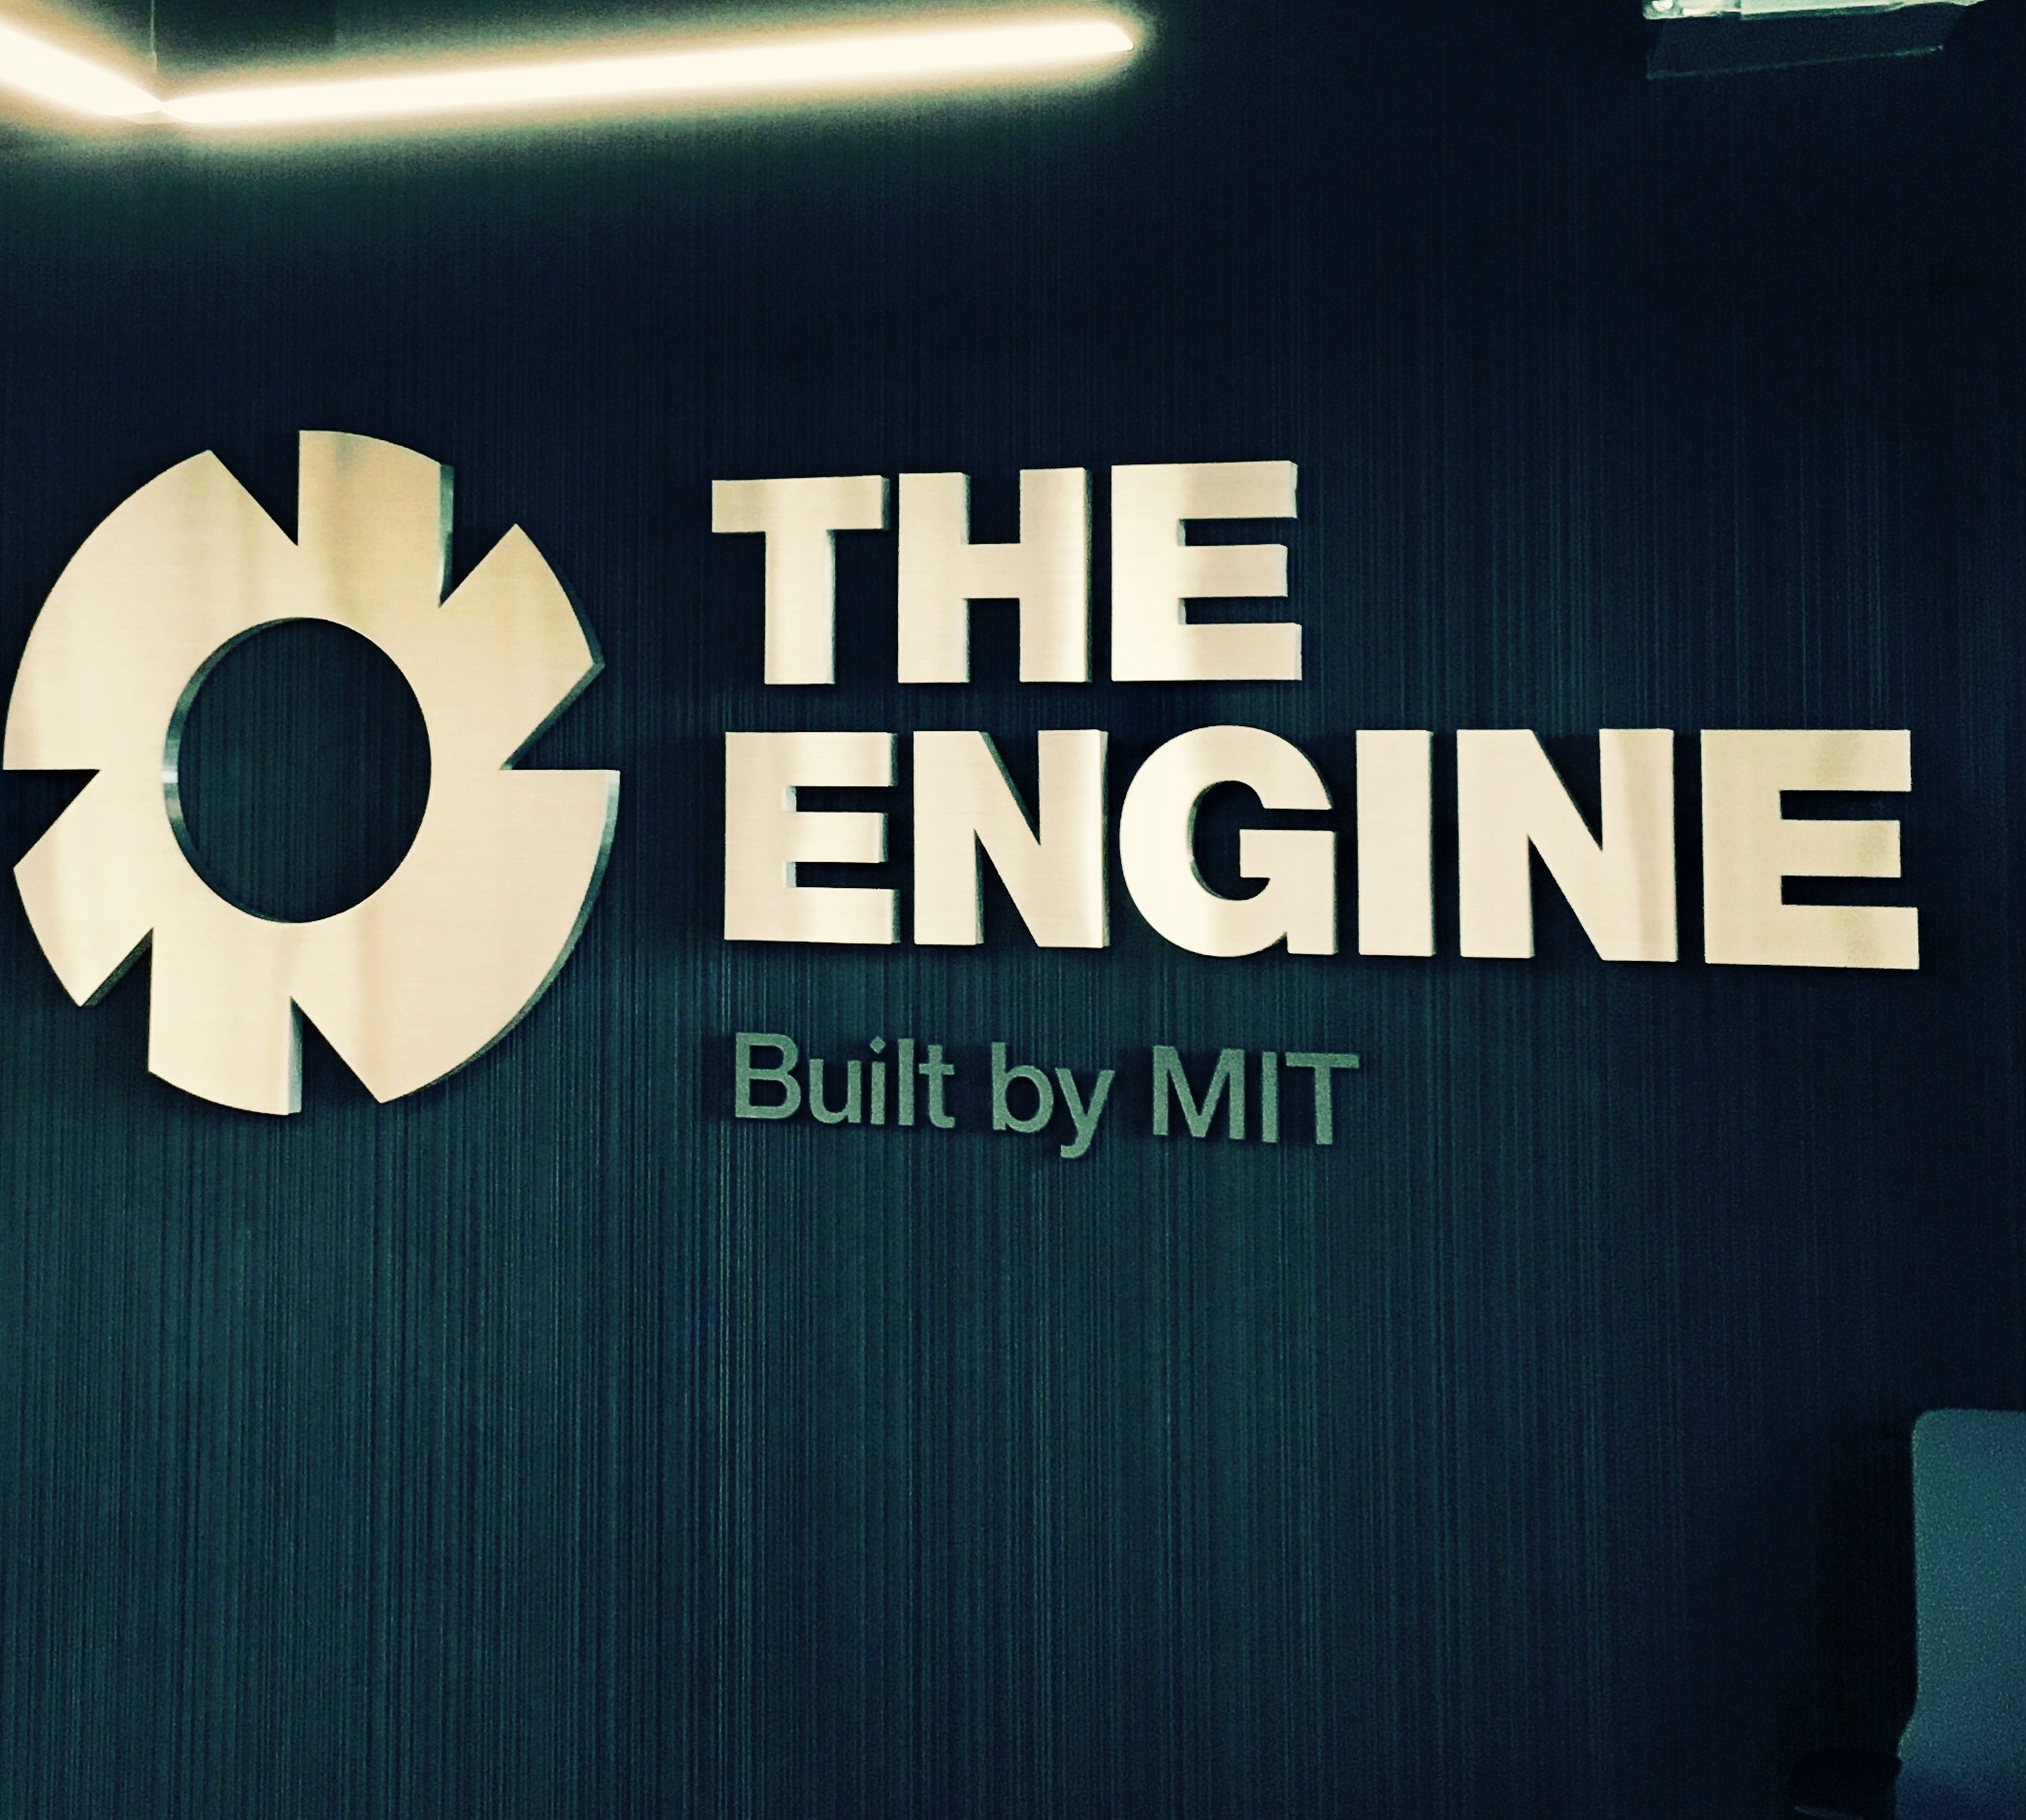 MIT’s The Engine wants to fuel bold tech ideas in Boston